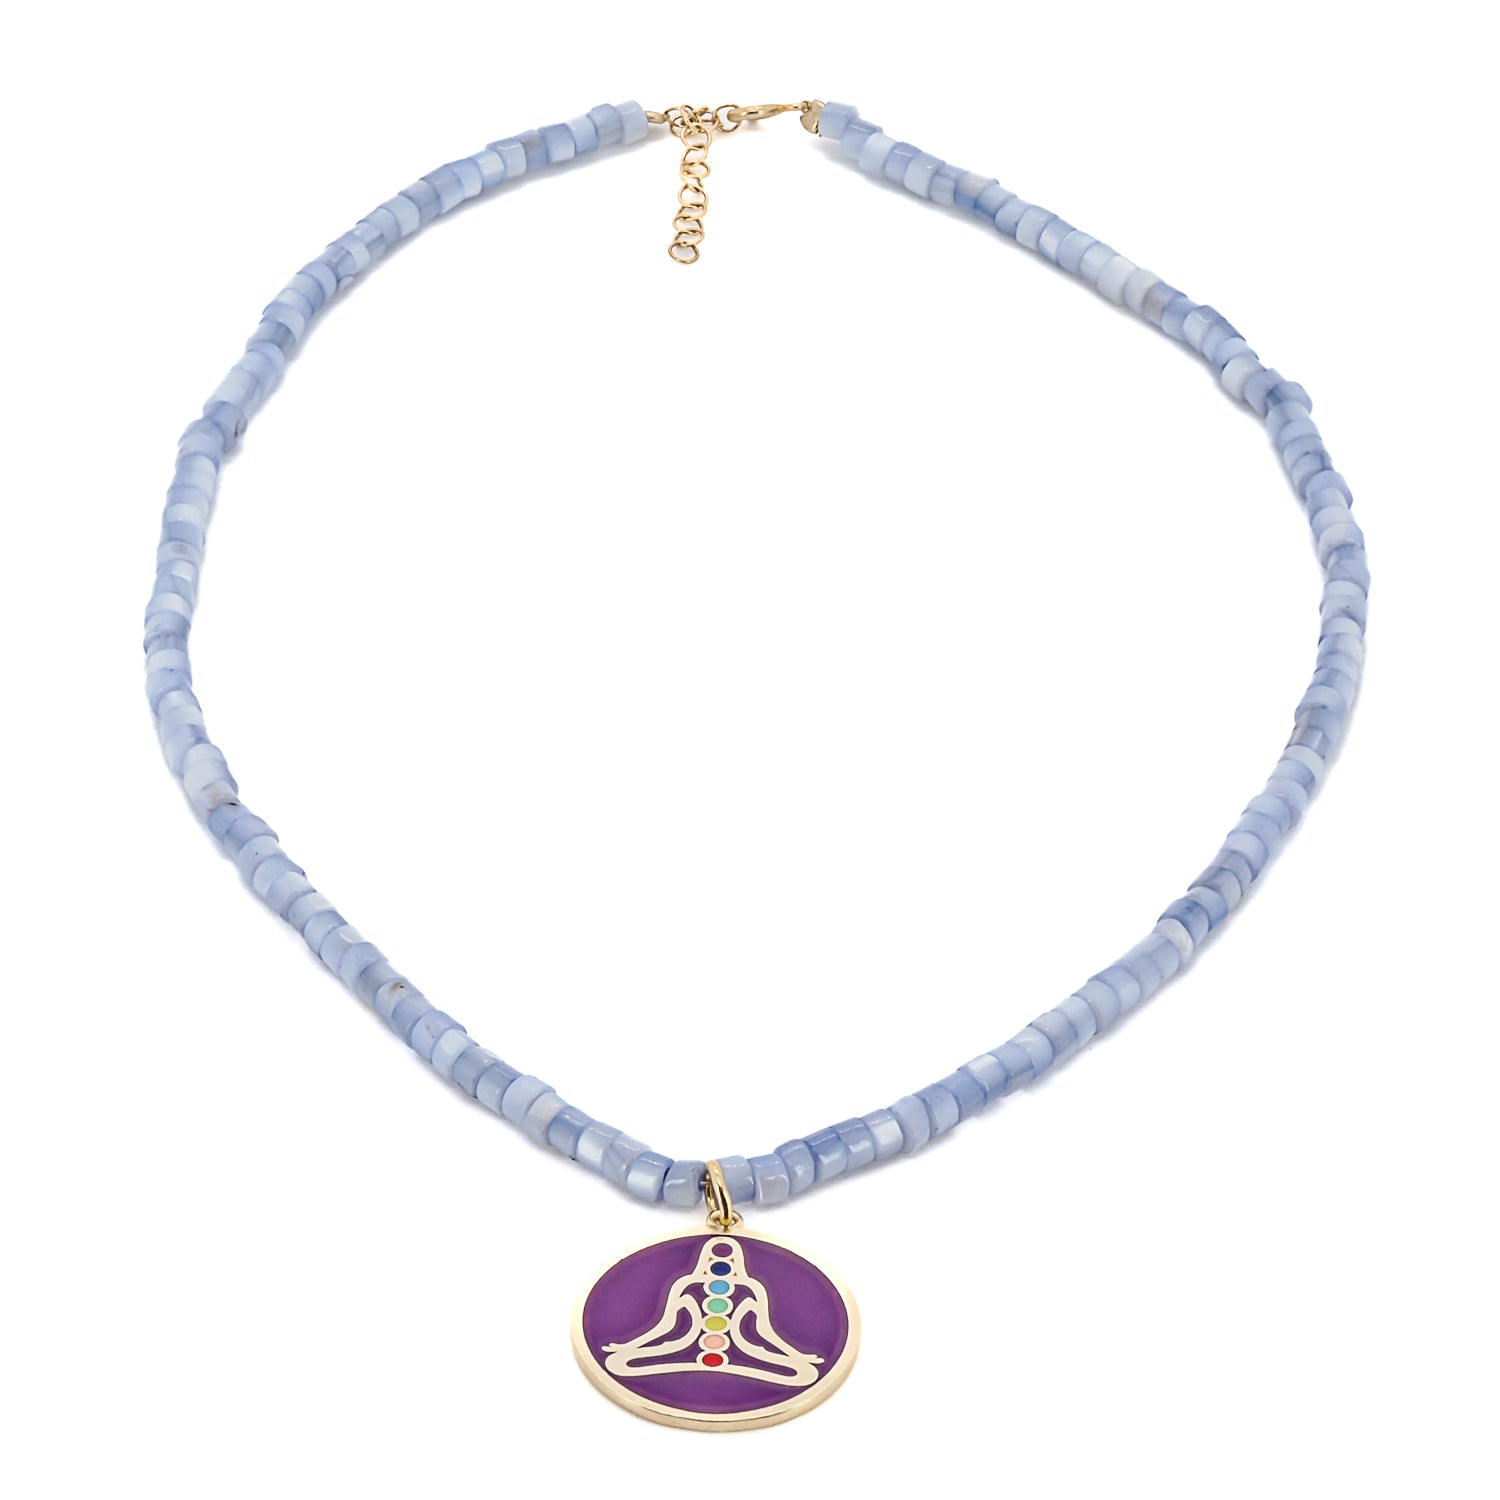 Necklace adorned with a beautiful chakra pendant and pearl stone beads in a lovely lilac color.